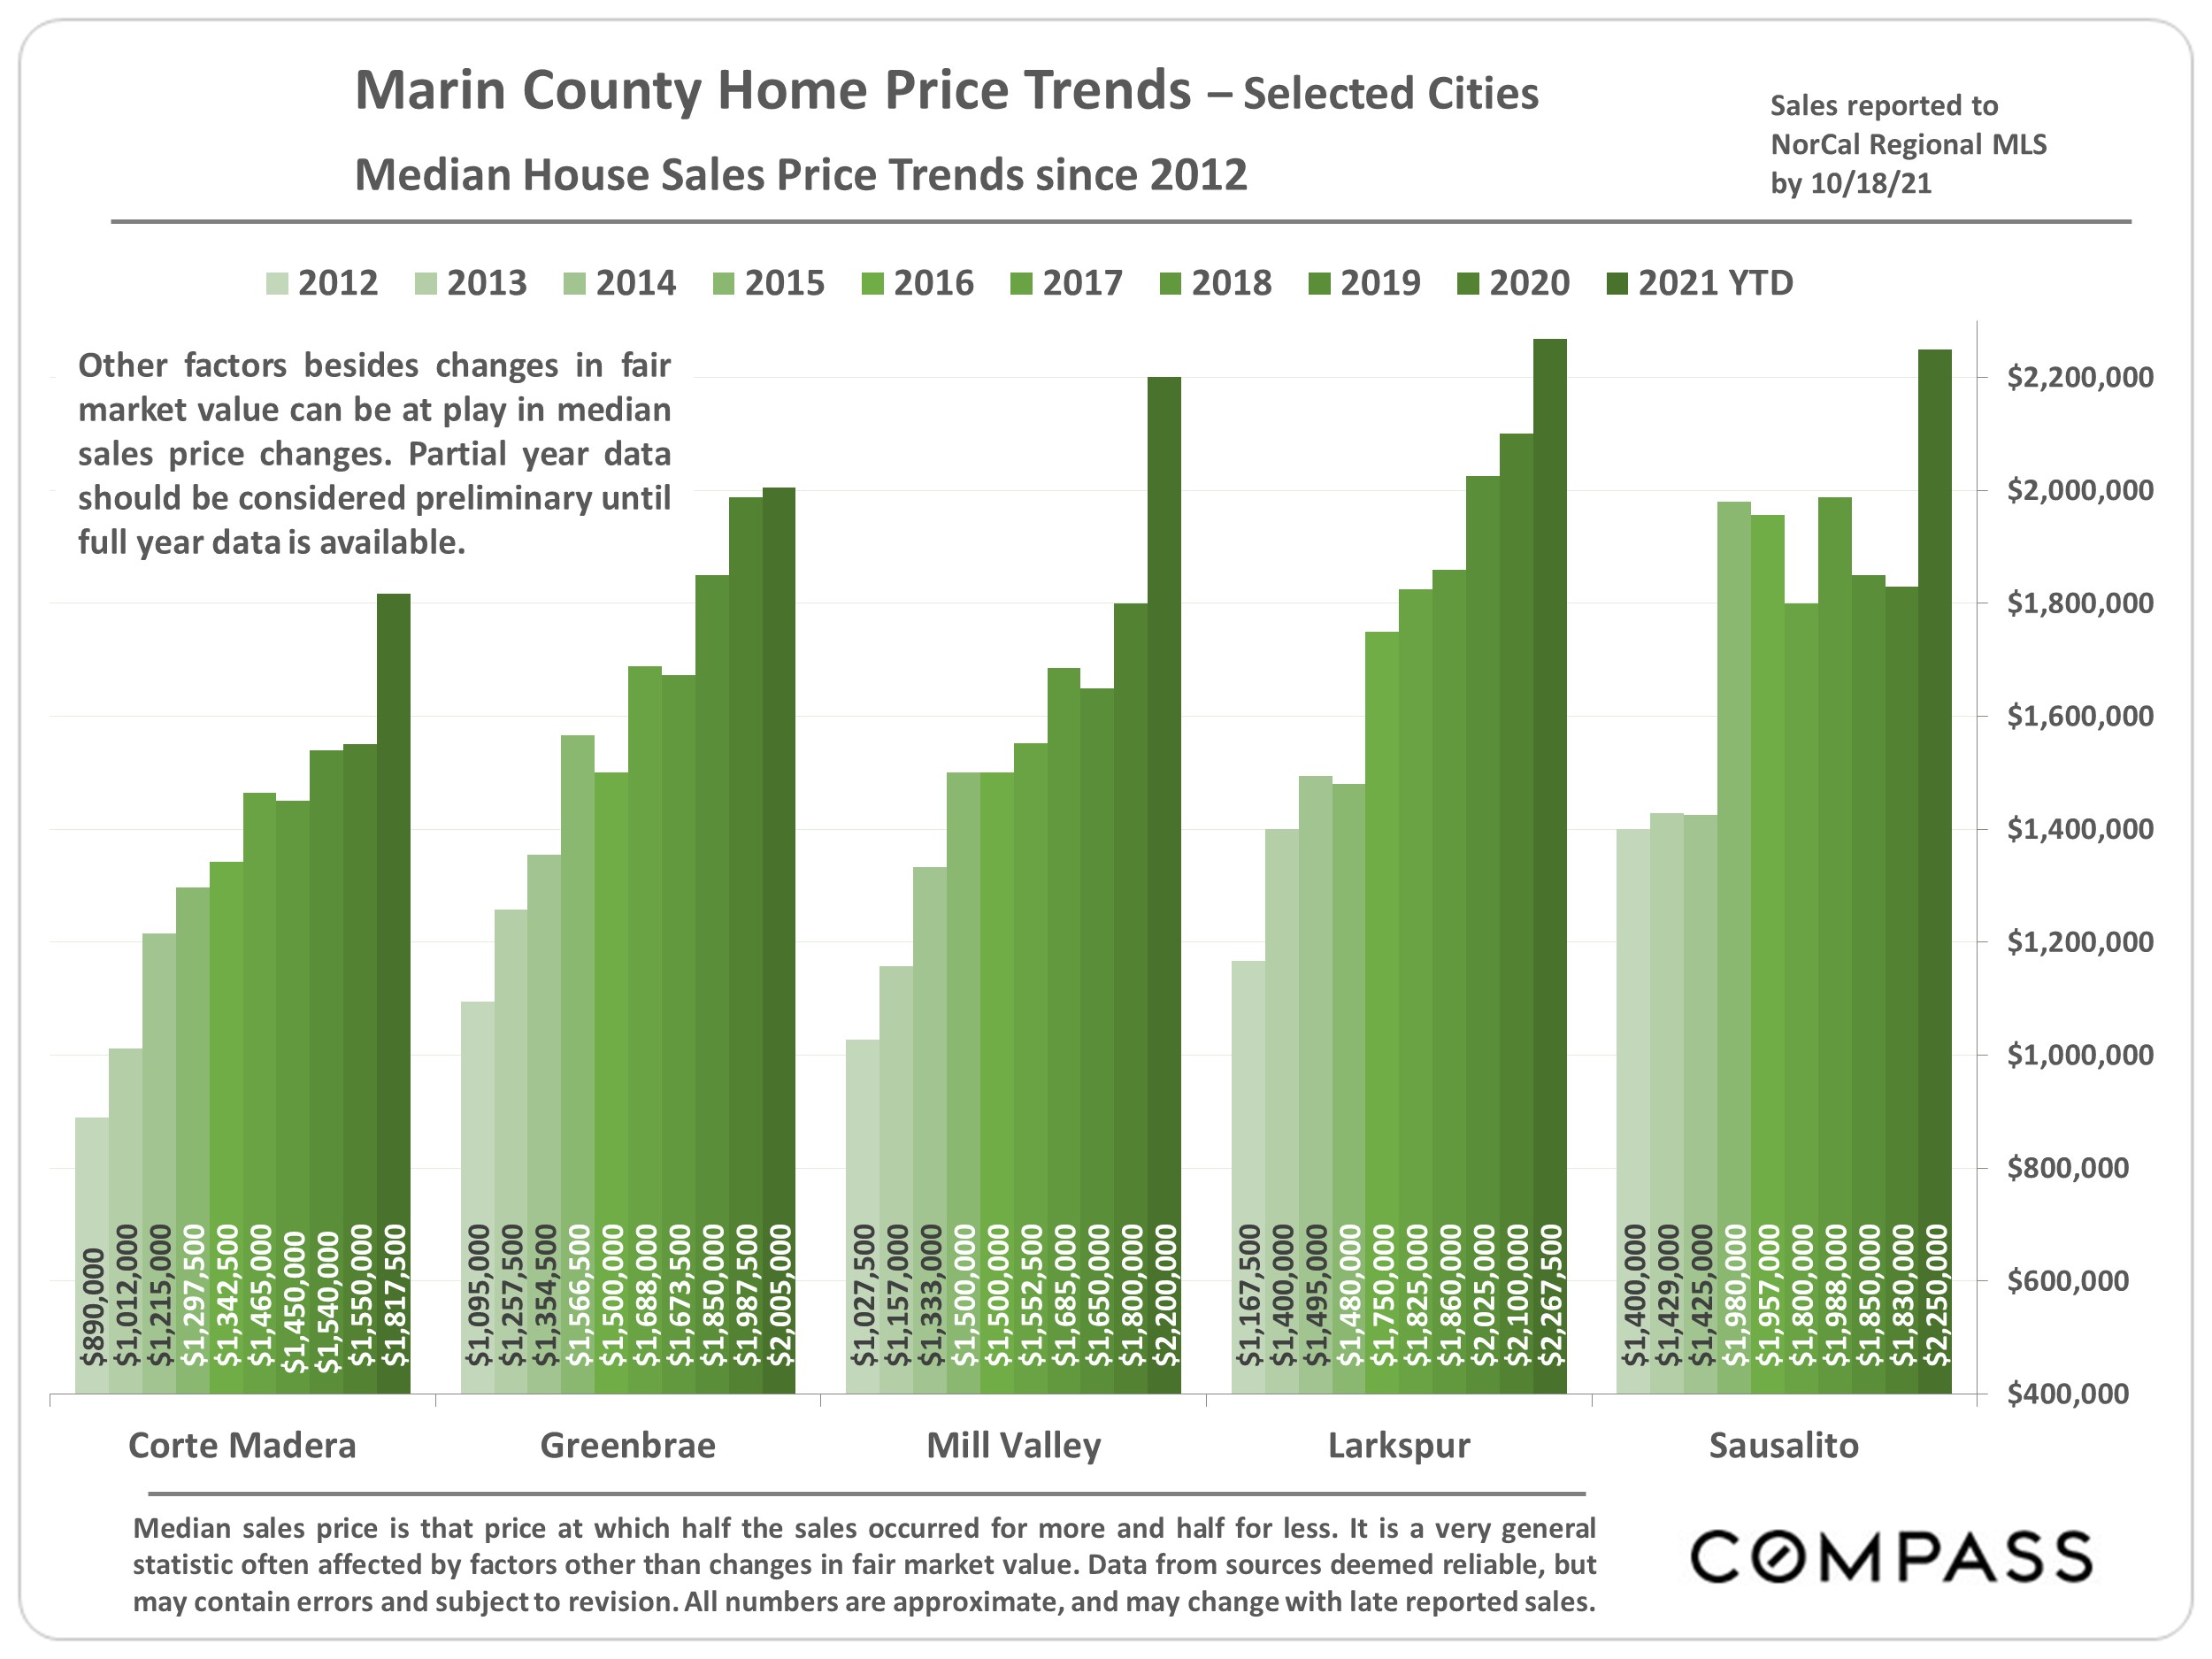 bar graphs of marin county home price trends in the southern cities